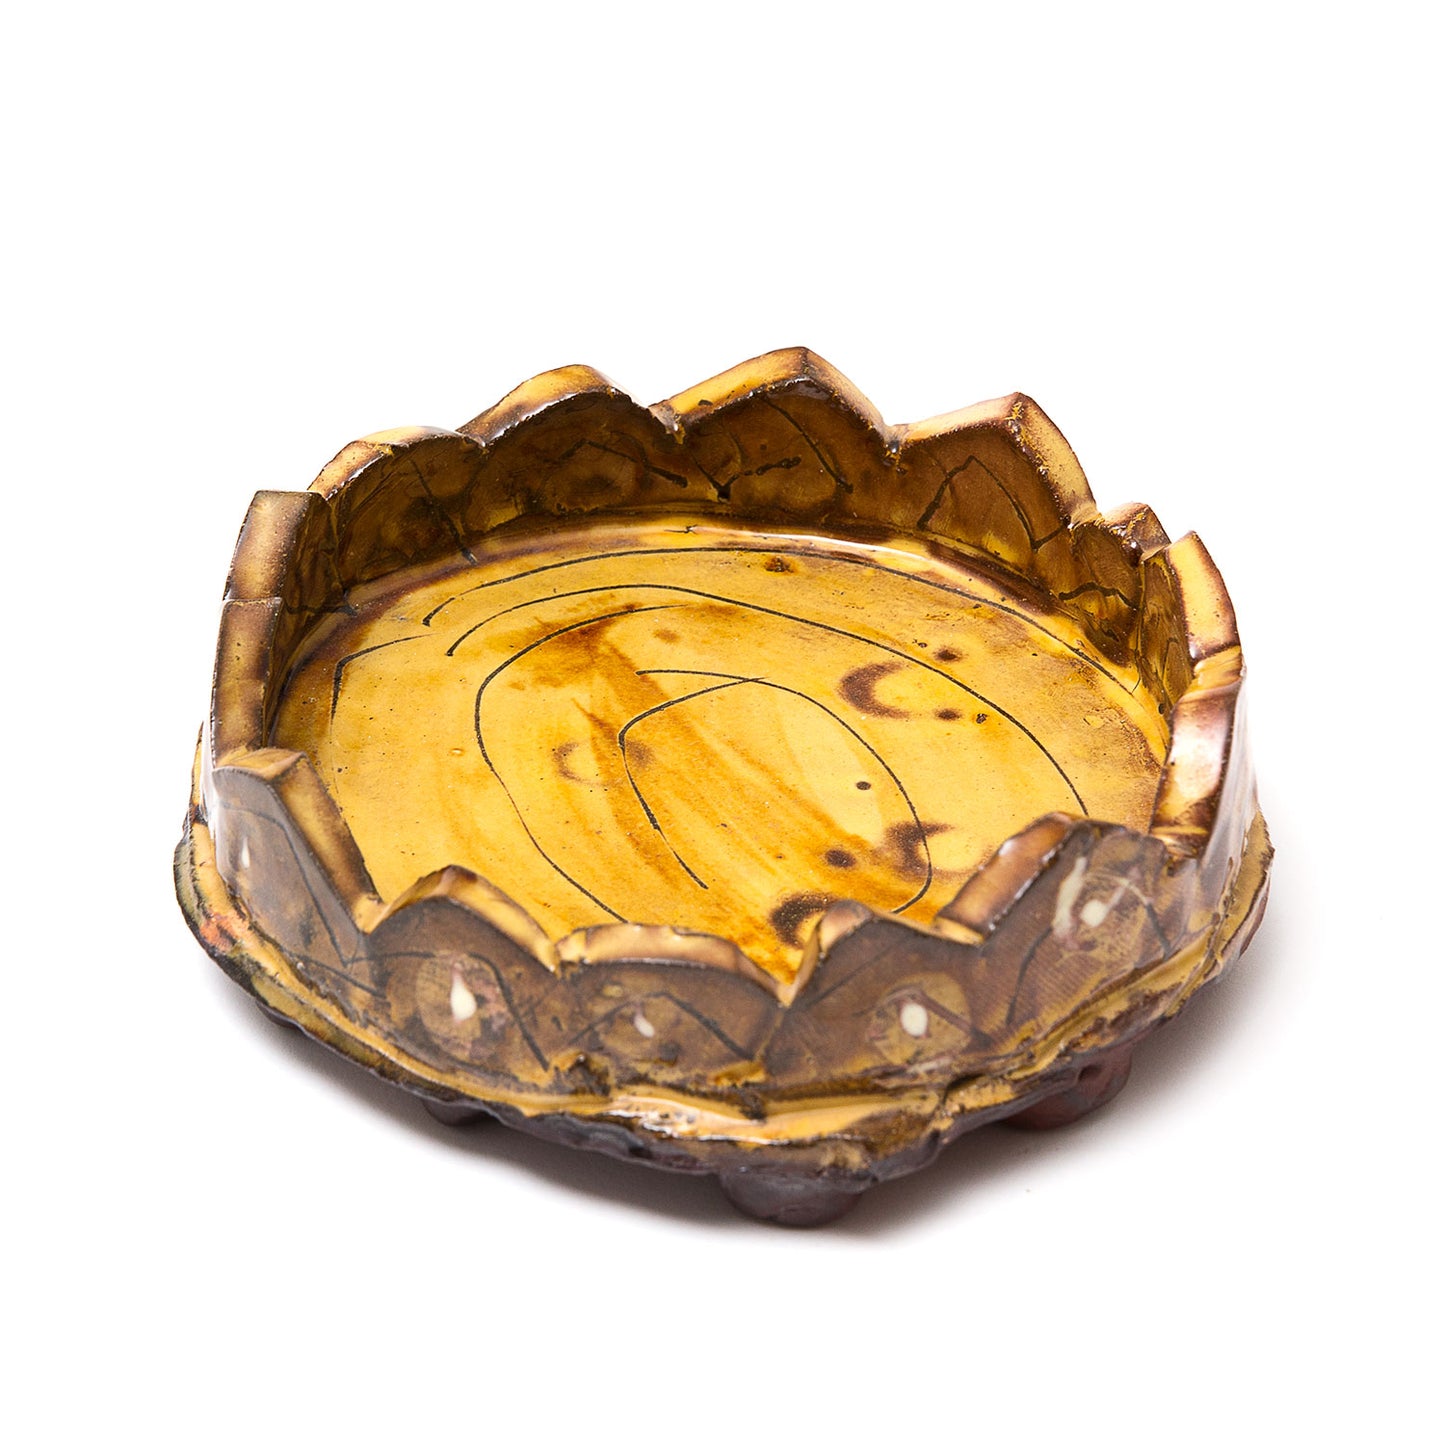 Small Footed Whimsical Dish